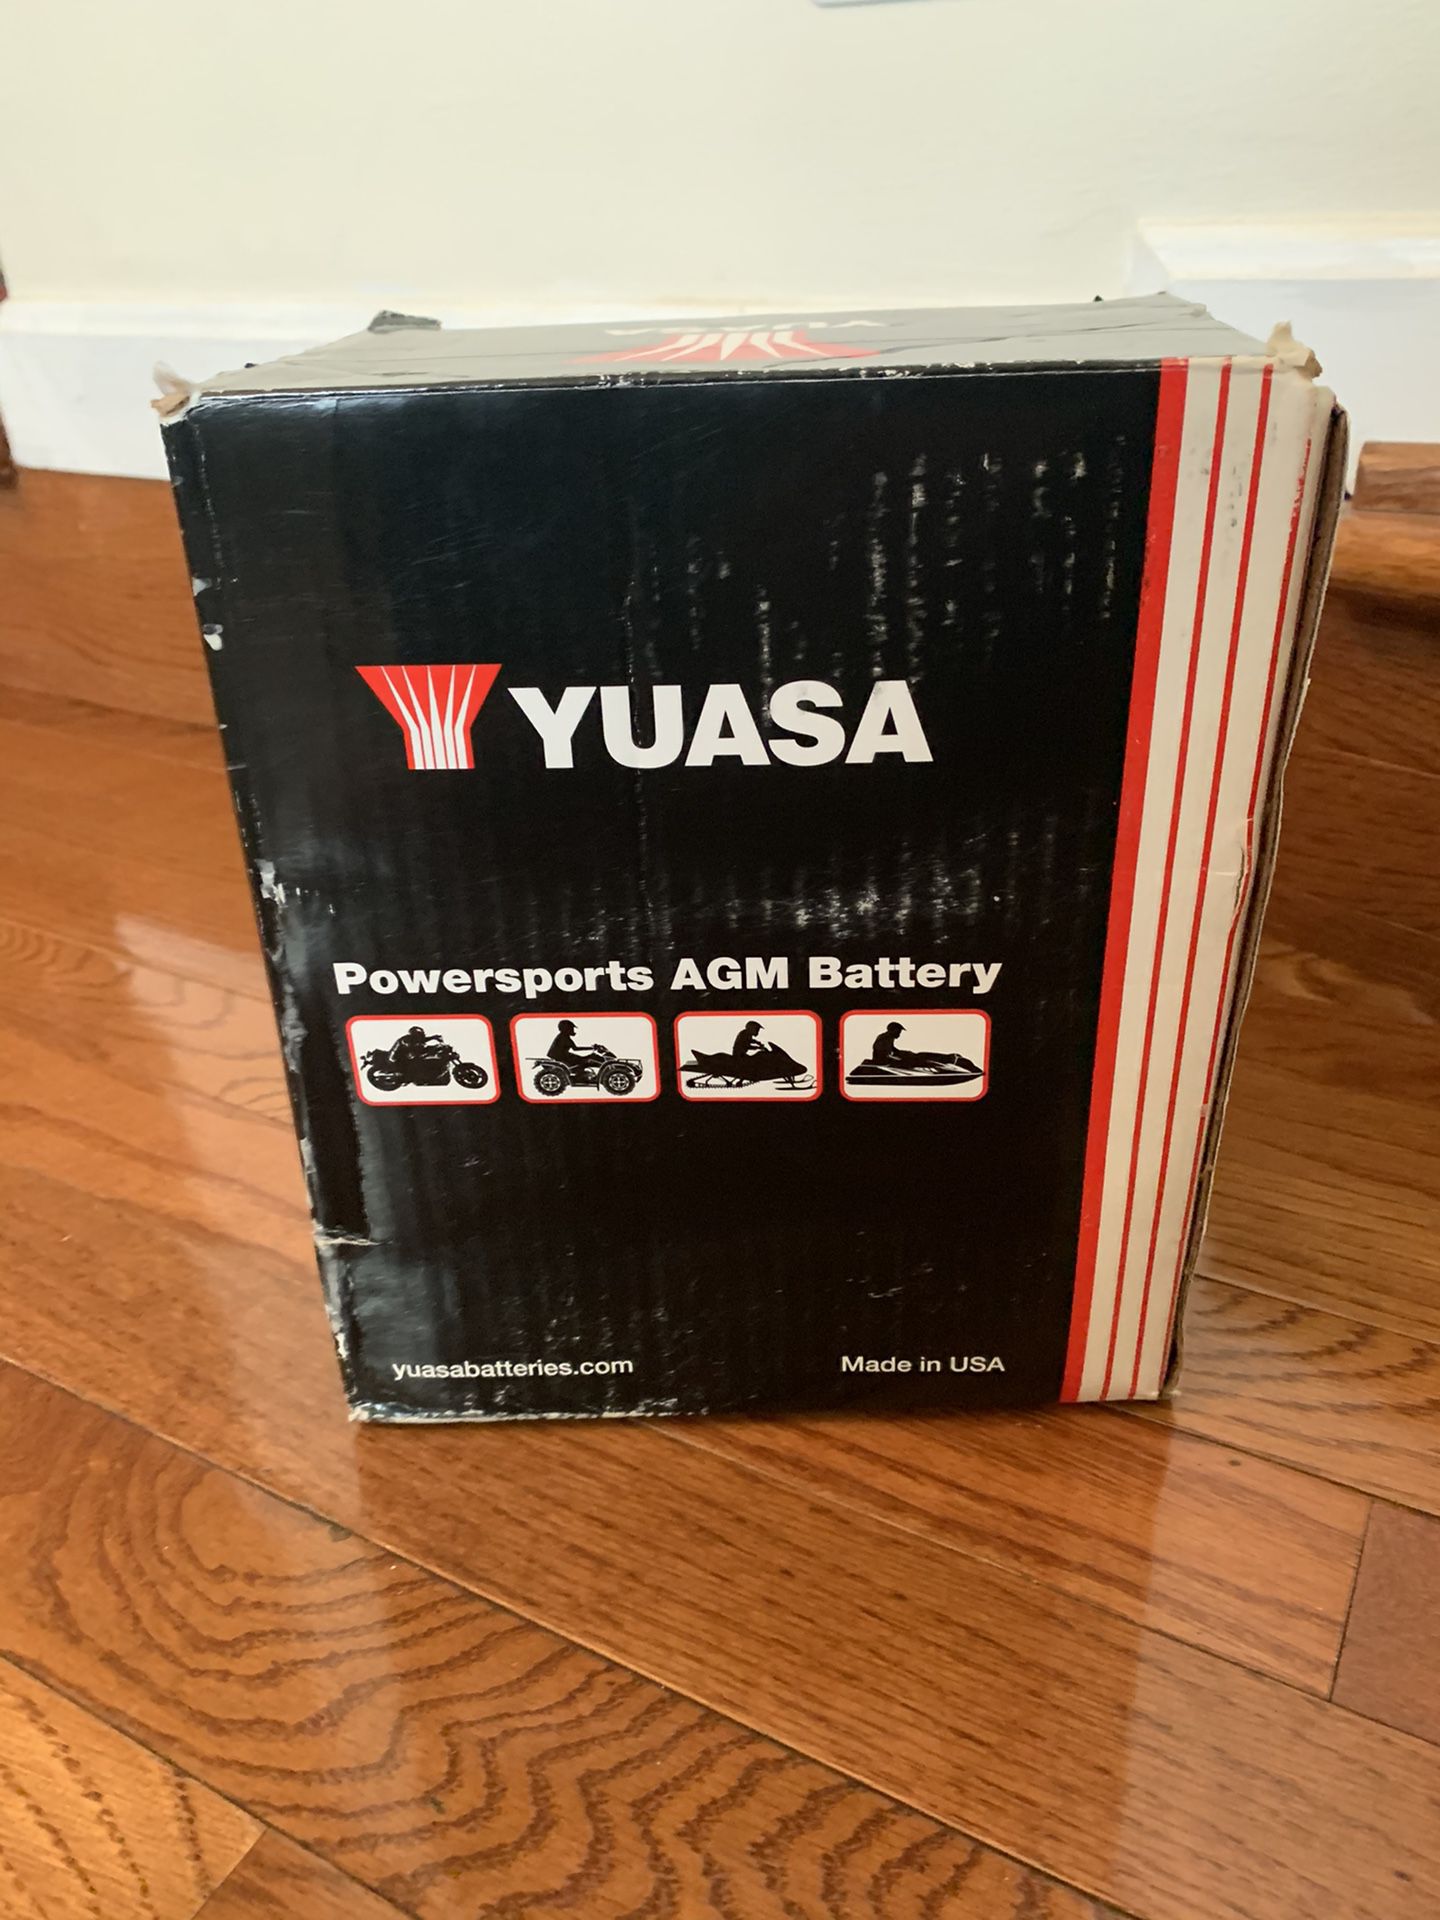 YUASA Quality High Performance Motorcycle Battery (Brand New!) $49 or Best Offer!